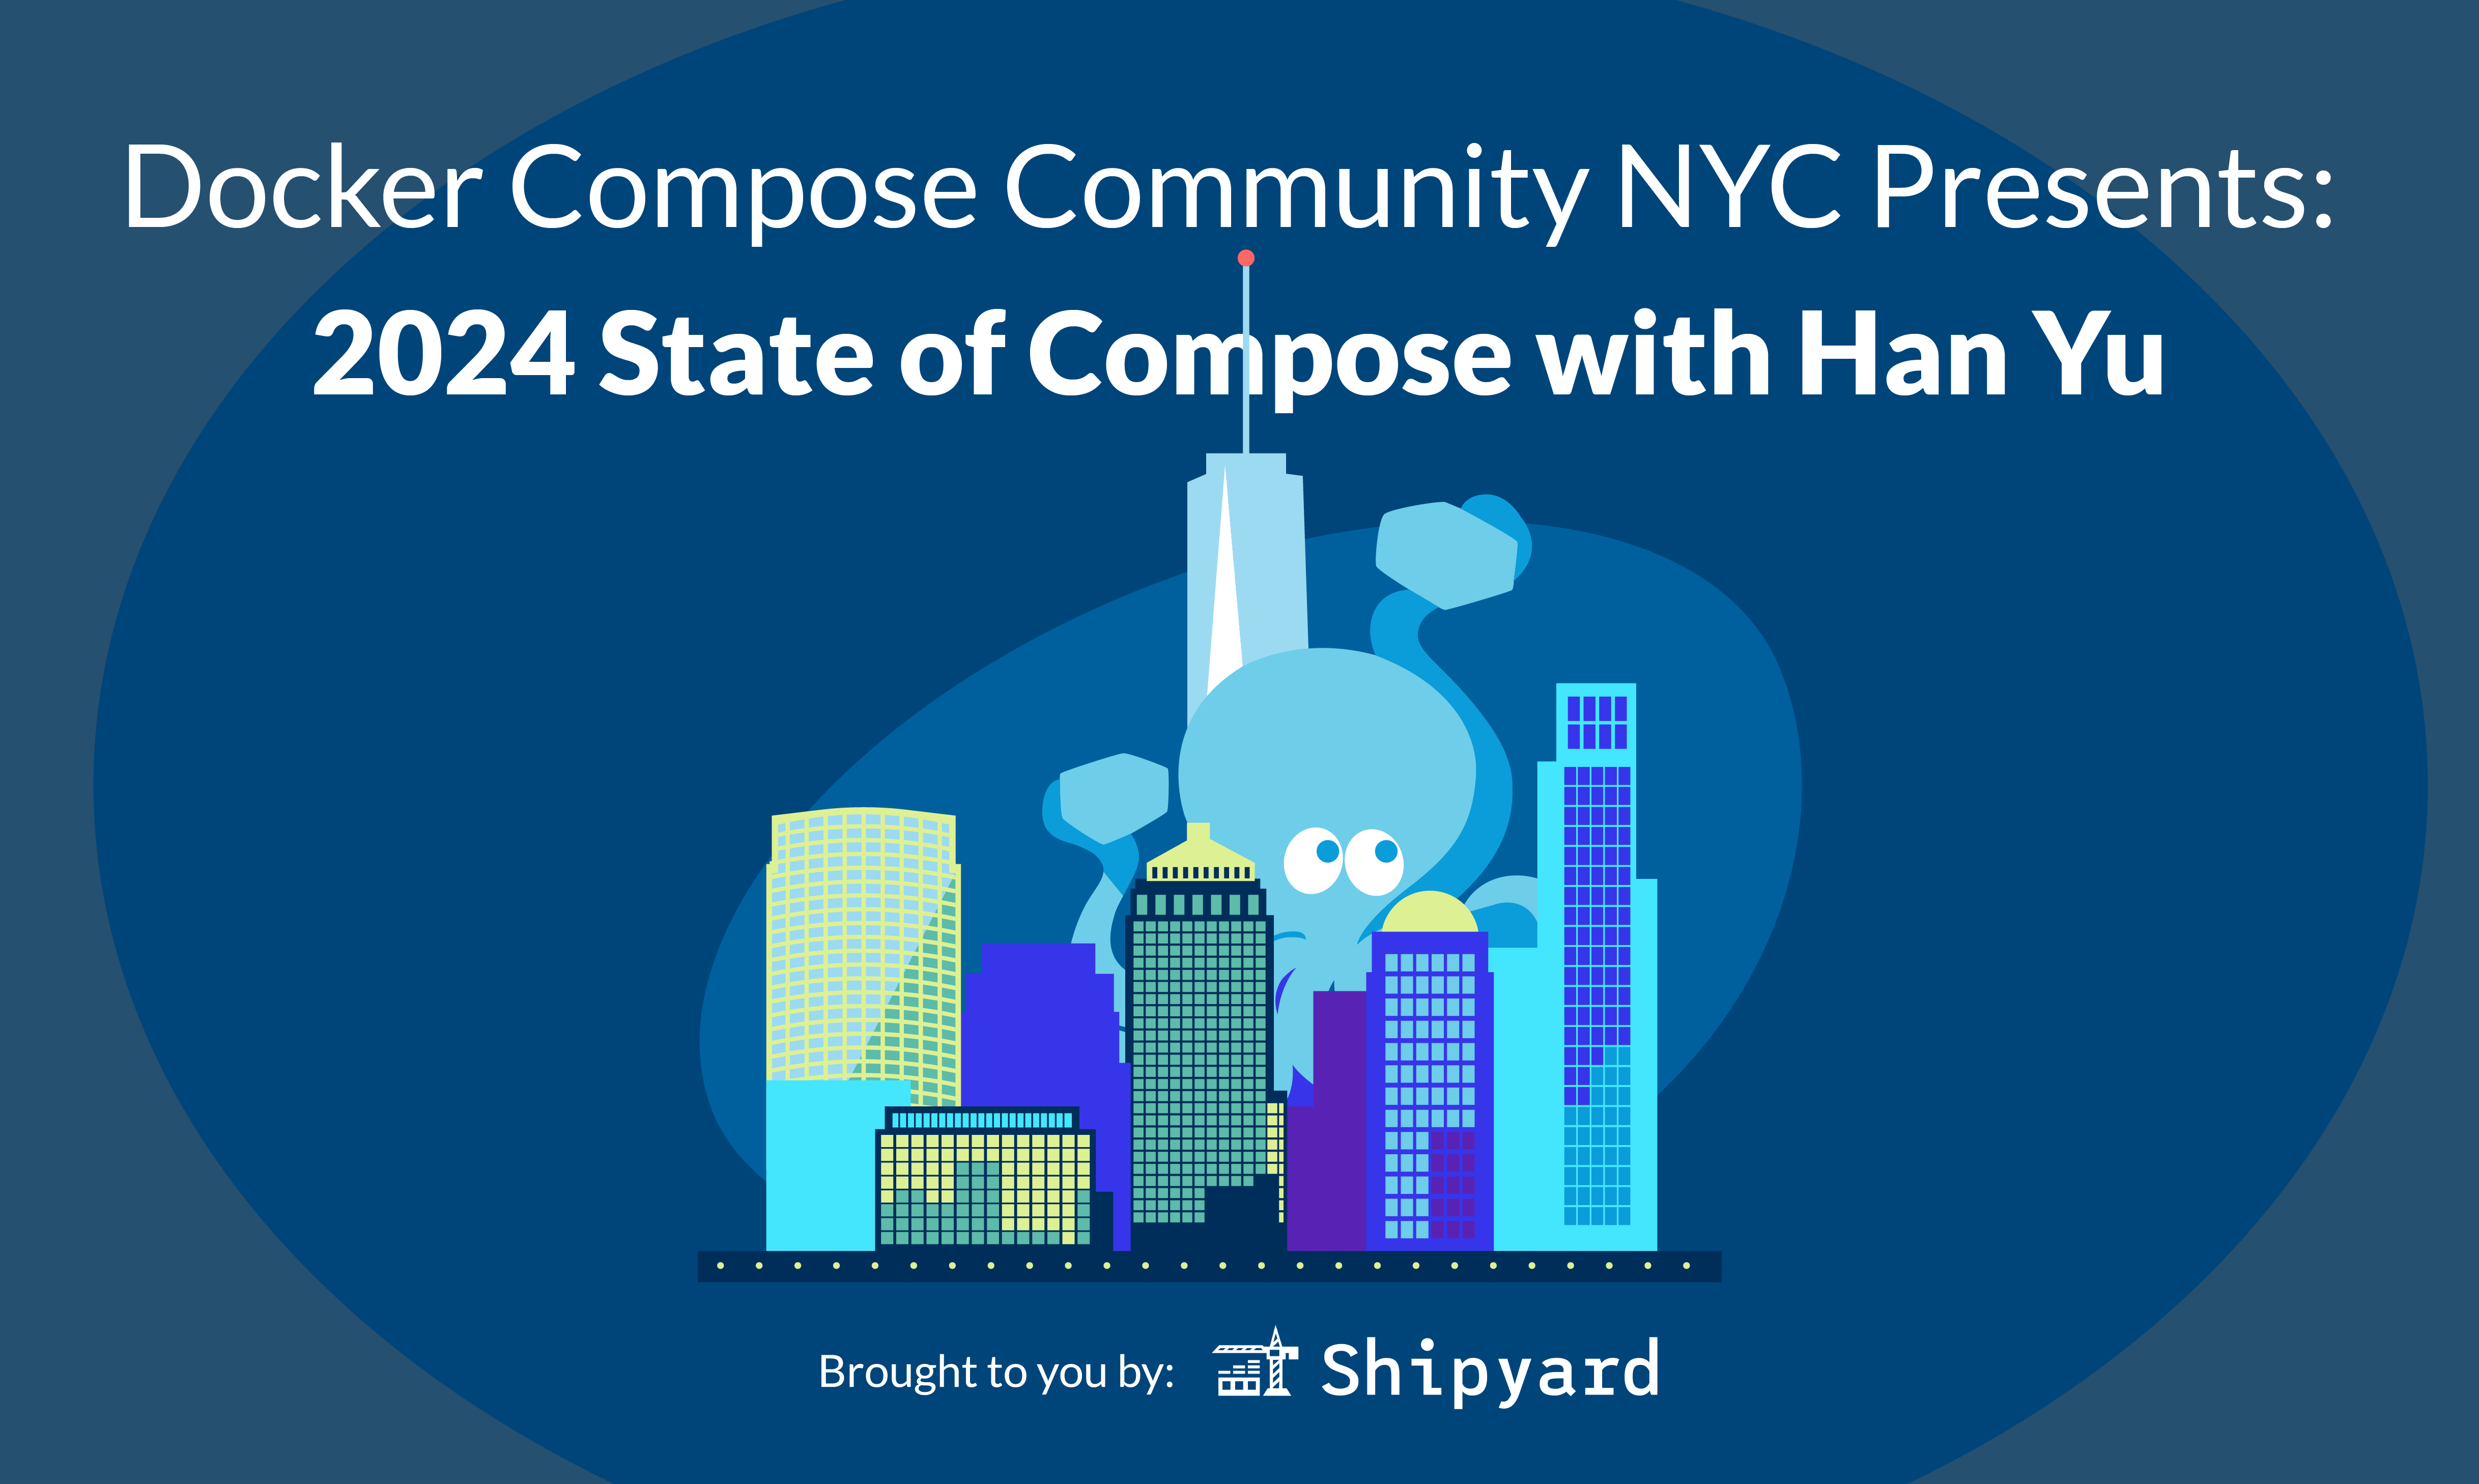 2024 State of Docker Compose with Han Yu and Shipyard